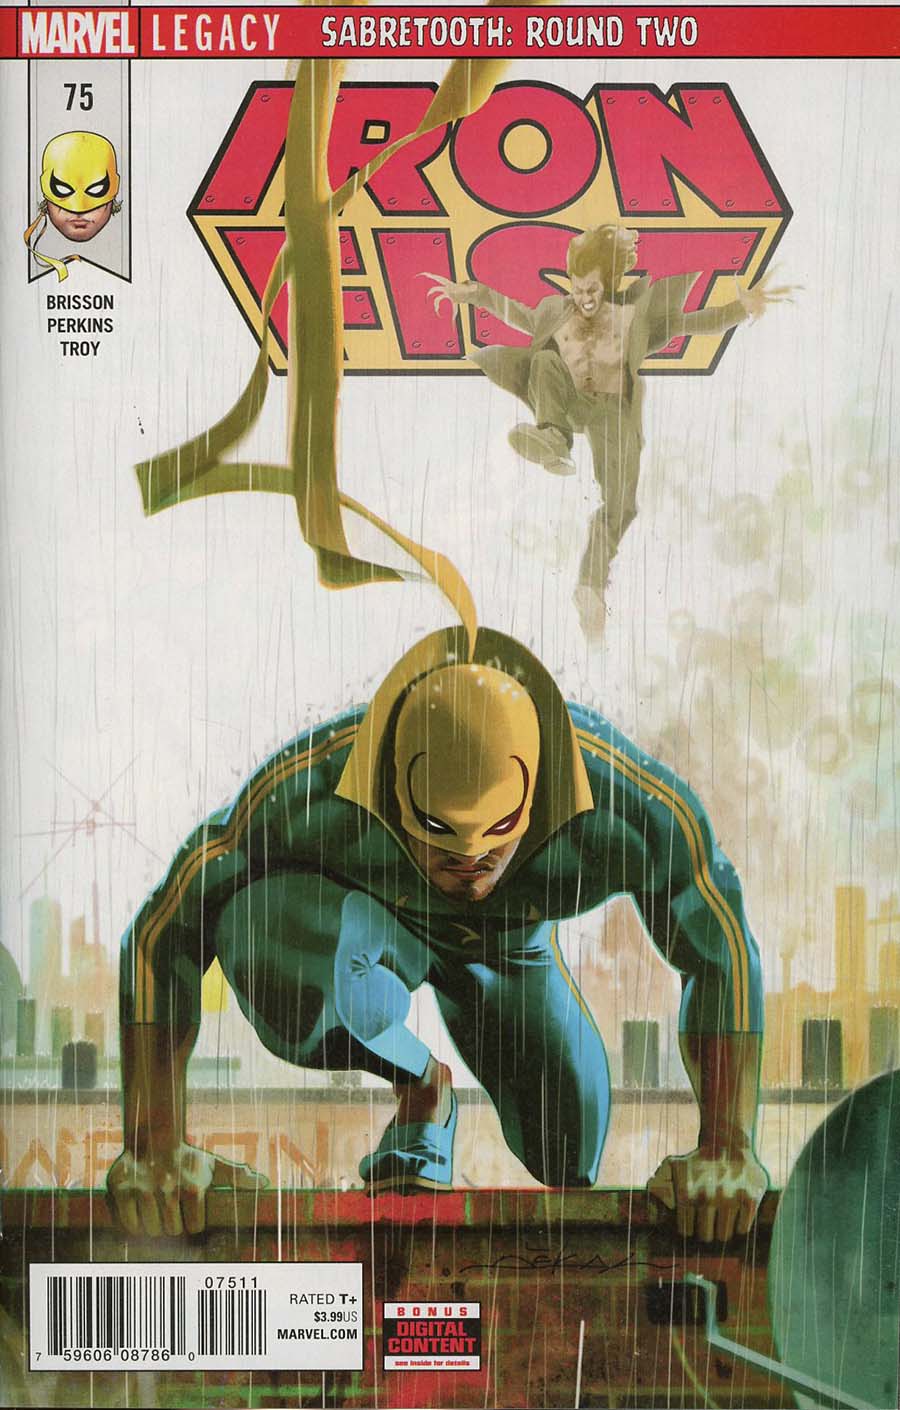 Iron Fist Vol 5 #75 Cover A Regular Jeff Dekal Cover (Marvel Legacy Tie-In)